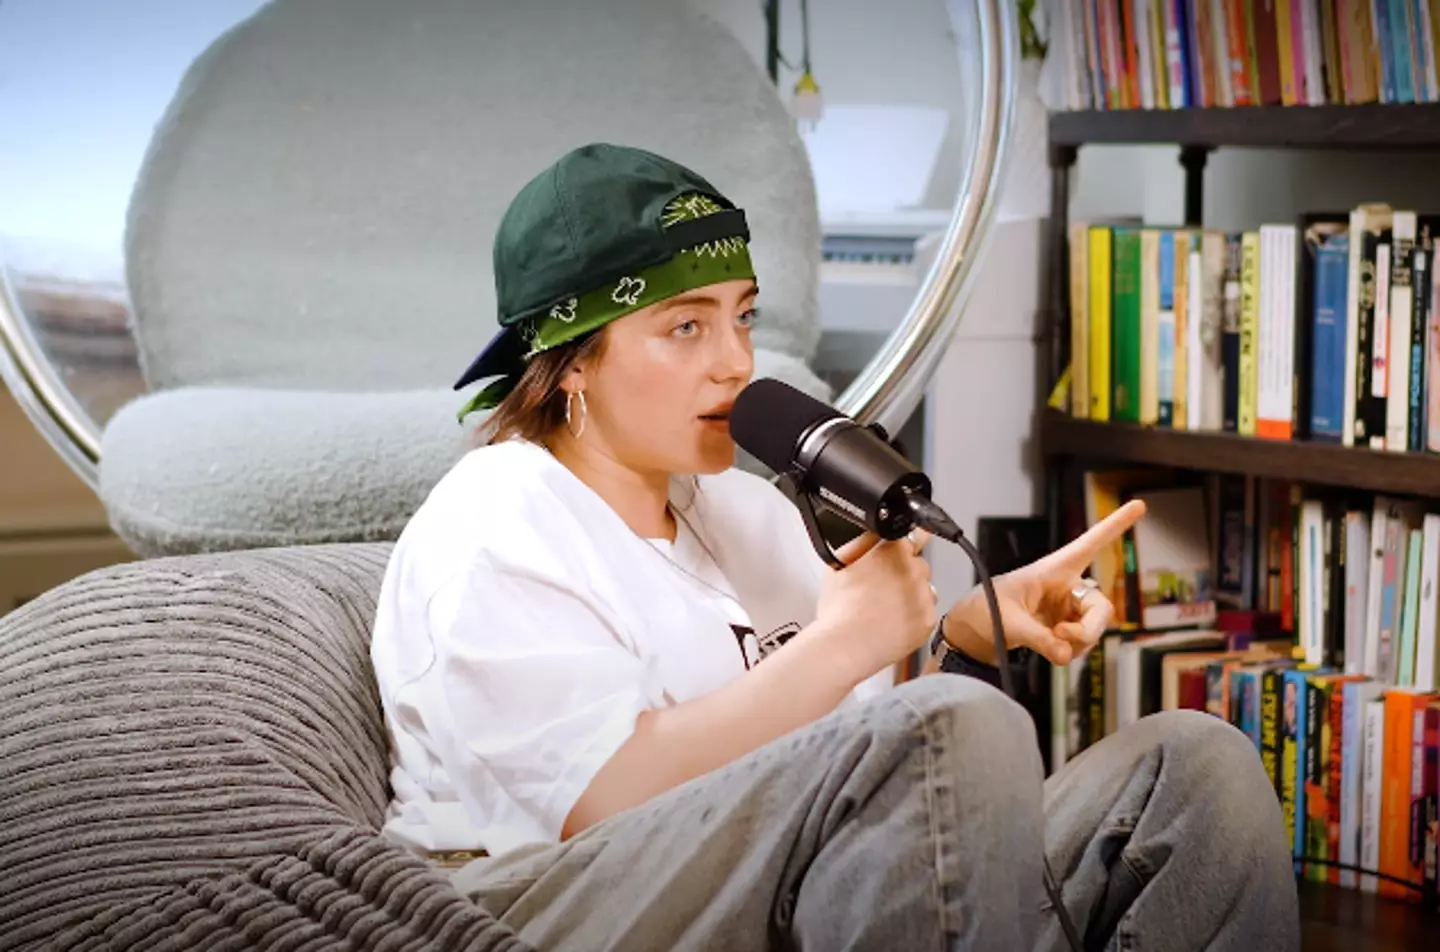 Billie Eilish has opened up on fame and some of its downsides. (BBC)